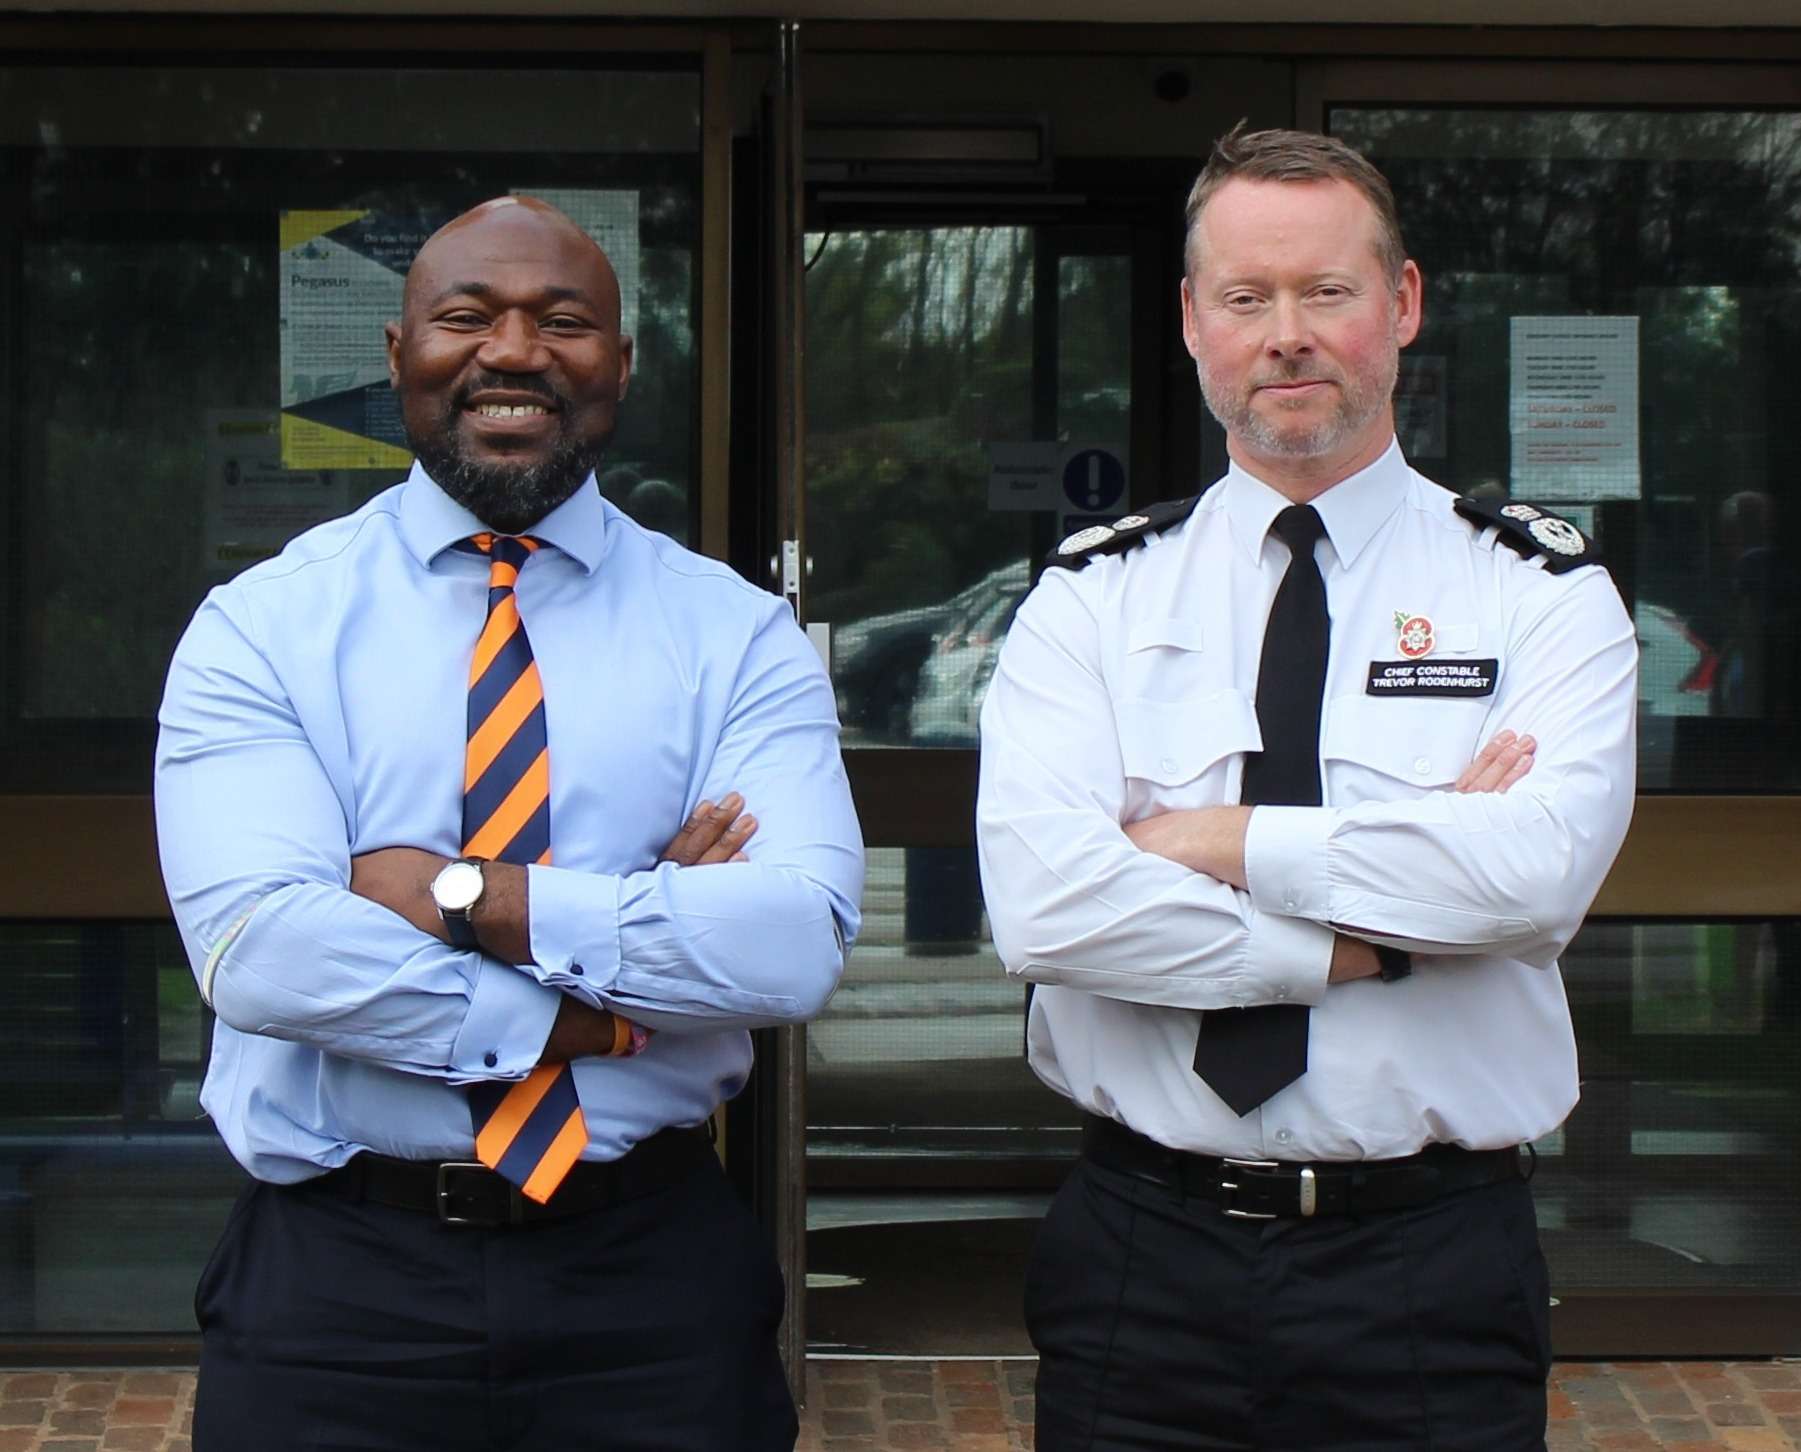 PCC Festus Akinbusoye and preferred candidate for Chief Constable, Trevor Rodenhurst